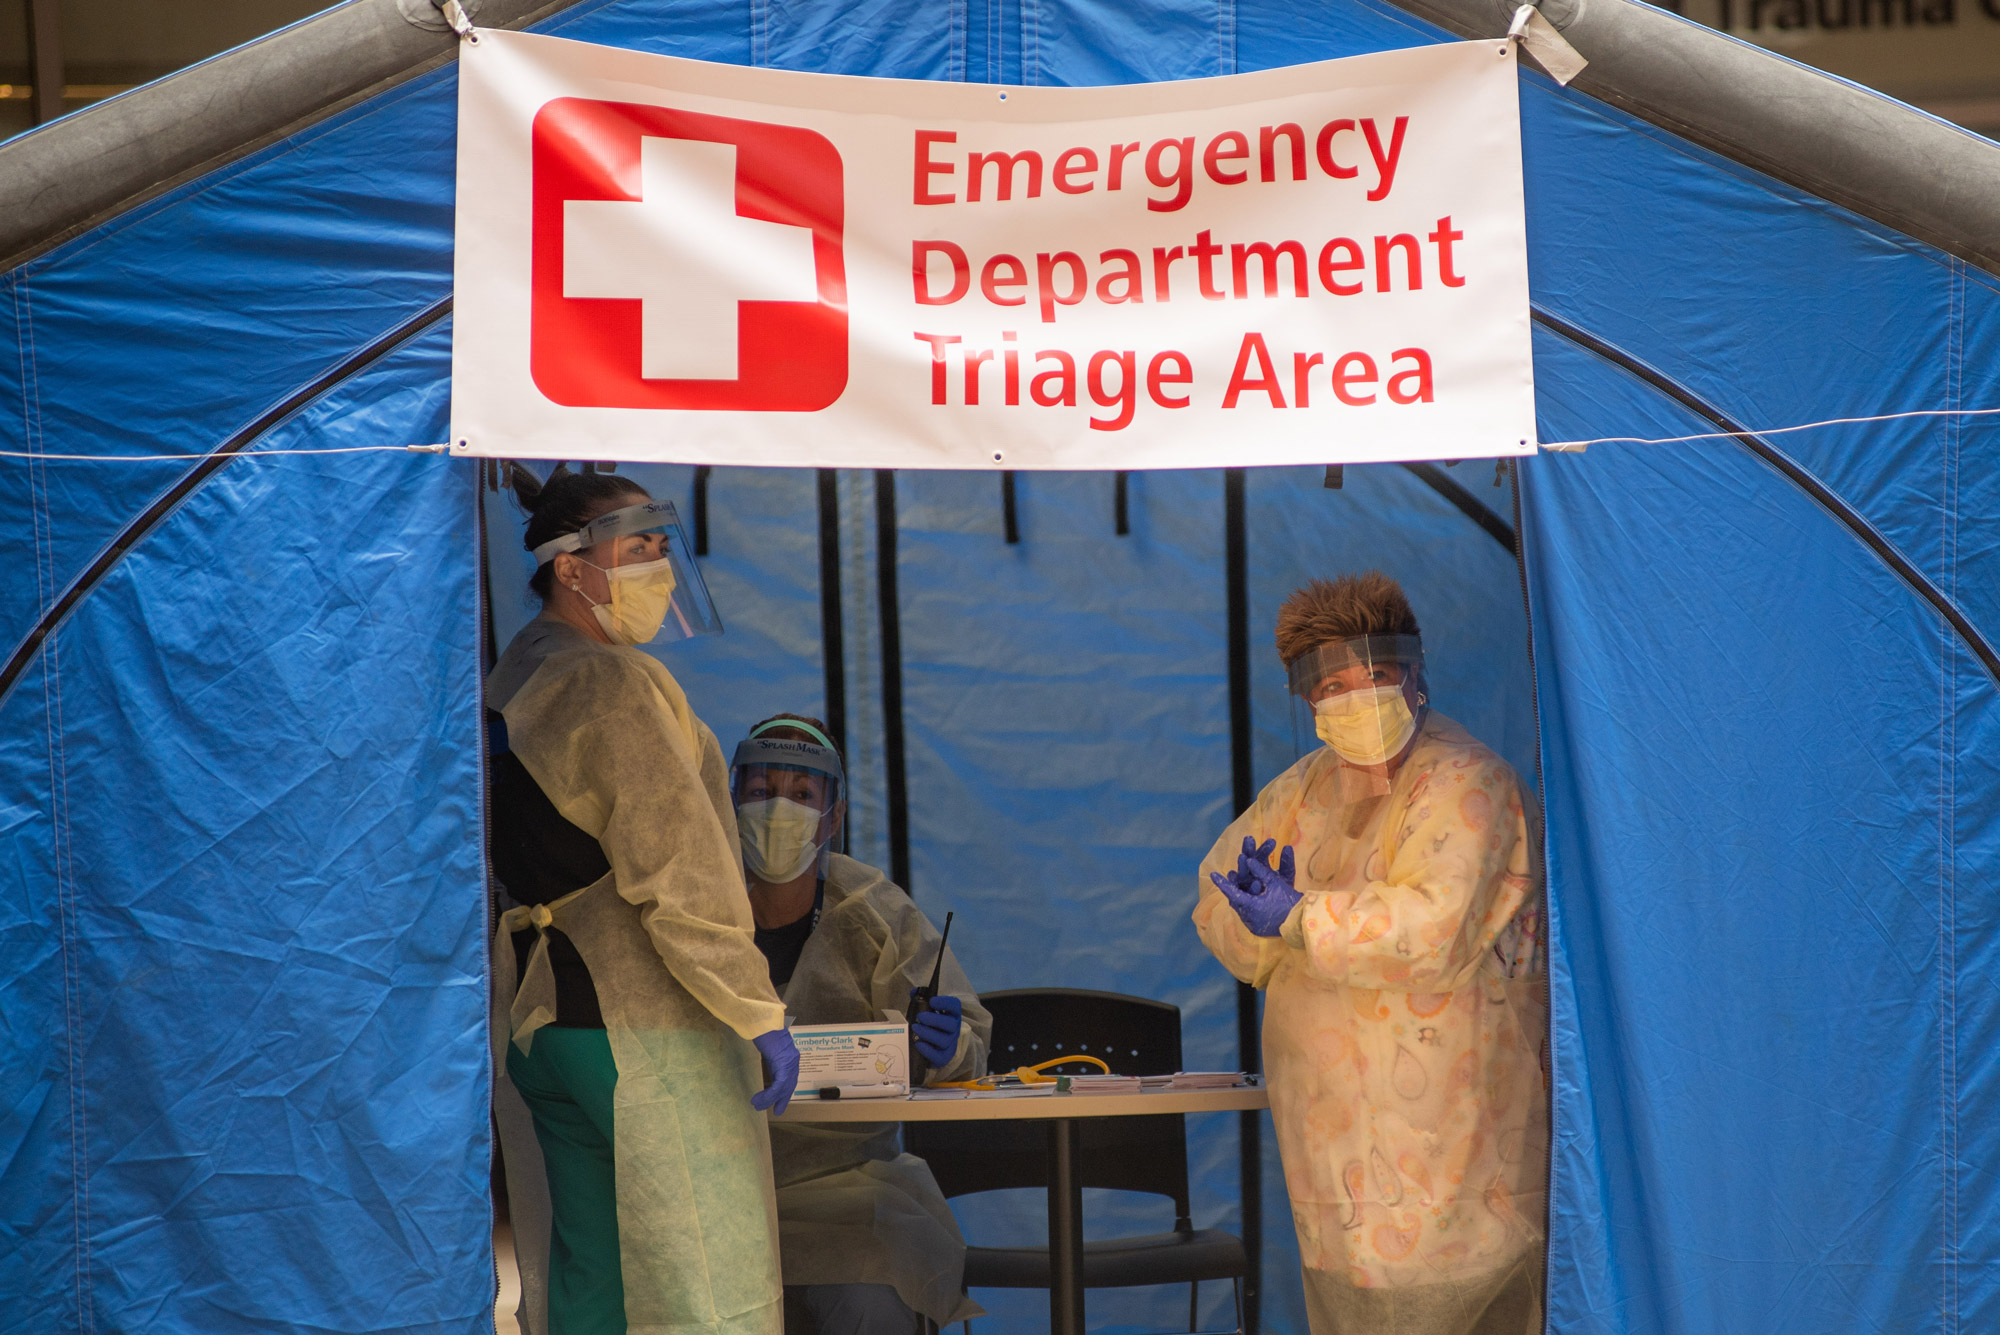 Nurses wait for patients outside Boston Medical Center during the early days of the pandemic, March 20, 2020. The staff inside the triage tent assessed patients’ symptoms and determined whether they could receive care through BMC’s influenza-like illness clinic (ILI) for more moderate symptoms, or if they needed to go to the Emergency Department for more serious conditions. The COVID-positive patient census at BMC skyrocketed from 22 patients on March 24, 2020, to 121 patients in just eight days, and reached 219 by April 9.